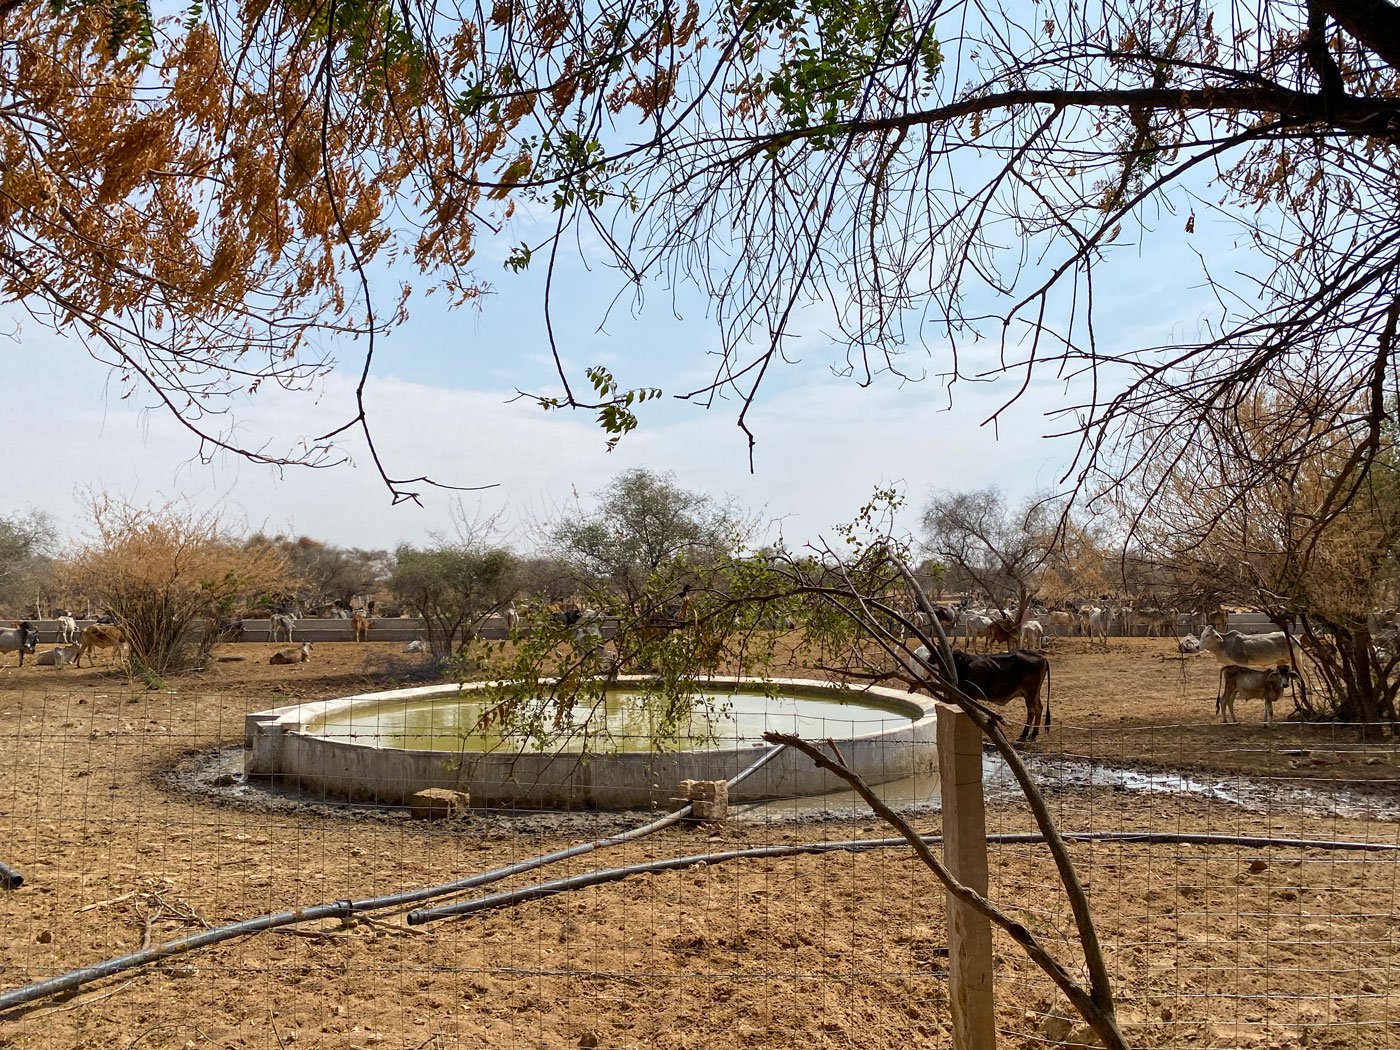 The gaushala (cow shelter) houses  roughly 44,000 cows and bulls of different breeds – Gir, Tharparkar, Rathi and Nagori